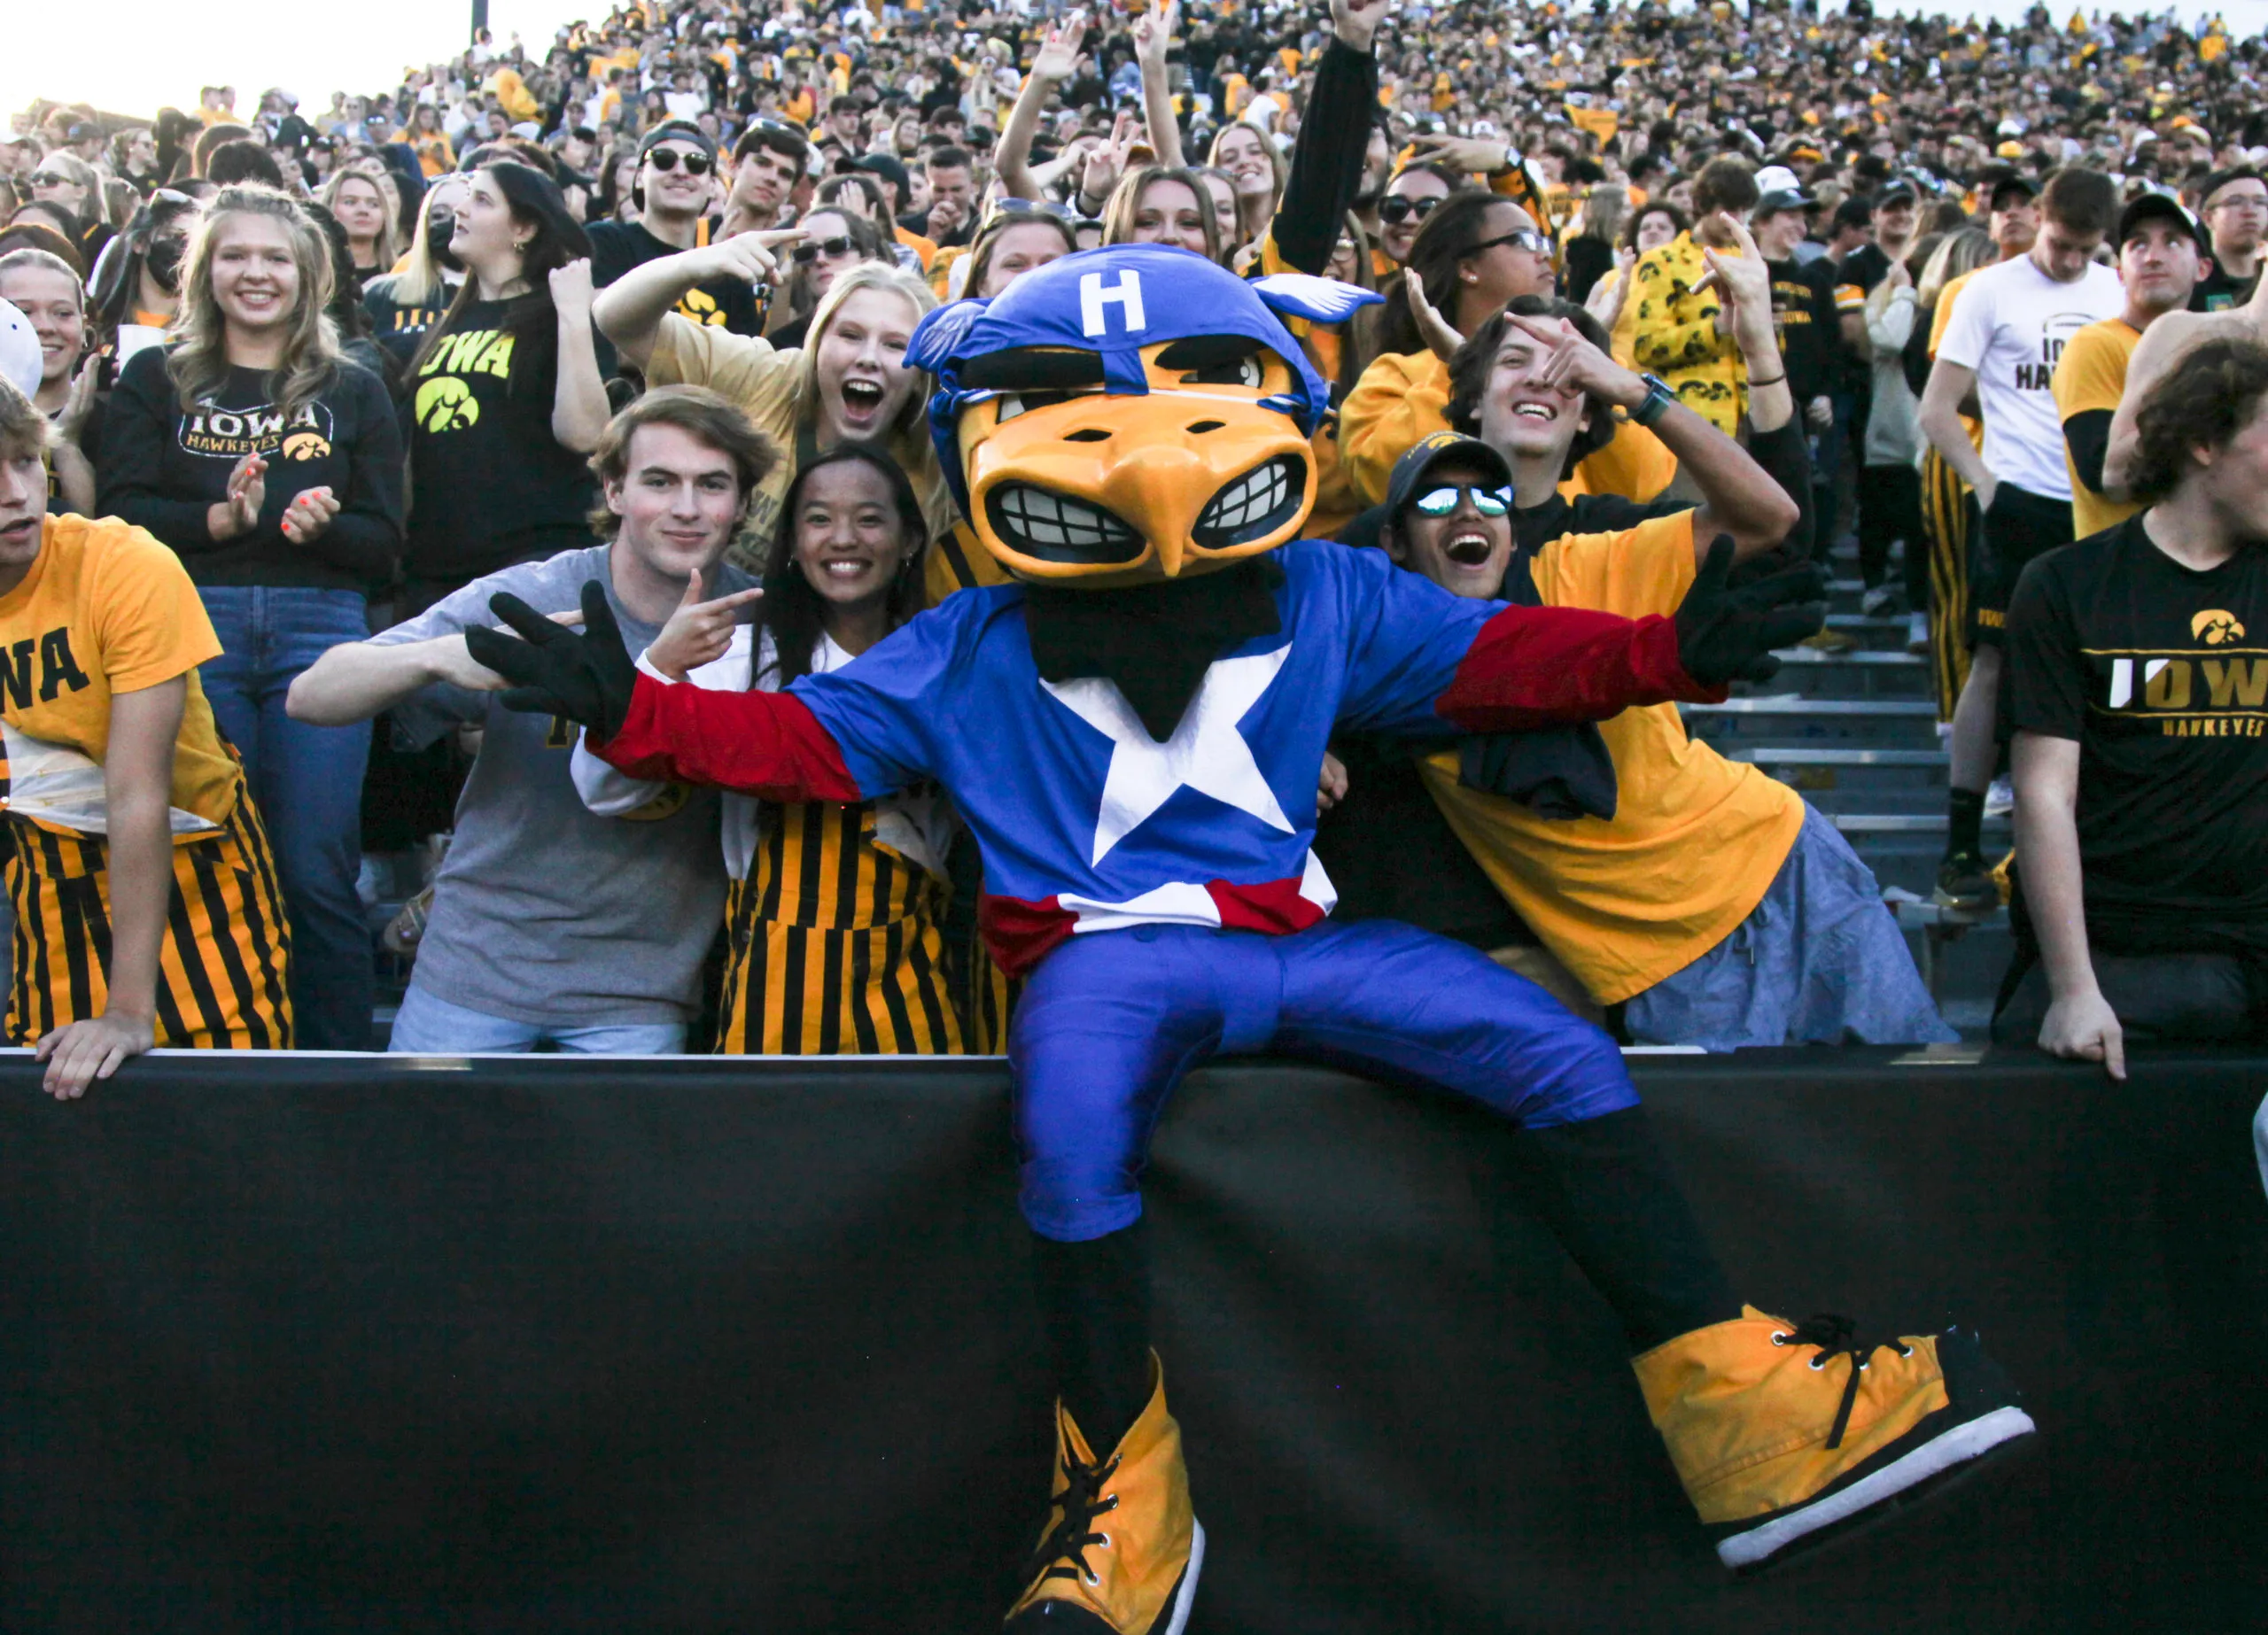 IOWA CITY, IOWA- OCTOBER 29:  Fans cheer in the student section with the mascot Herky the Hawk  during the match-up between the Northwestern Wildcats and the Iowa Hawkeyes at Kinnick Stadium, on October 29, 2022 in Iowa City, Iowa.  (Photo by Matthew Holst/Getty Images)